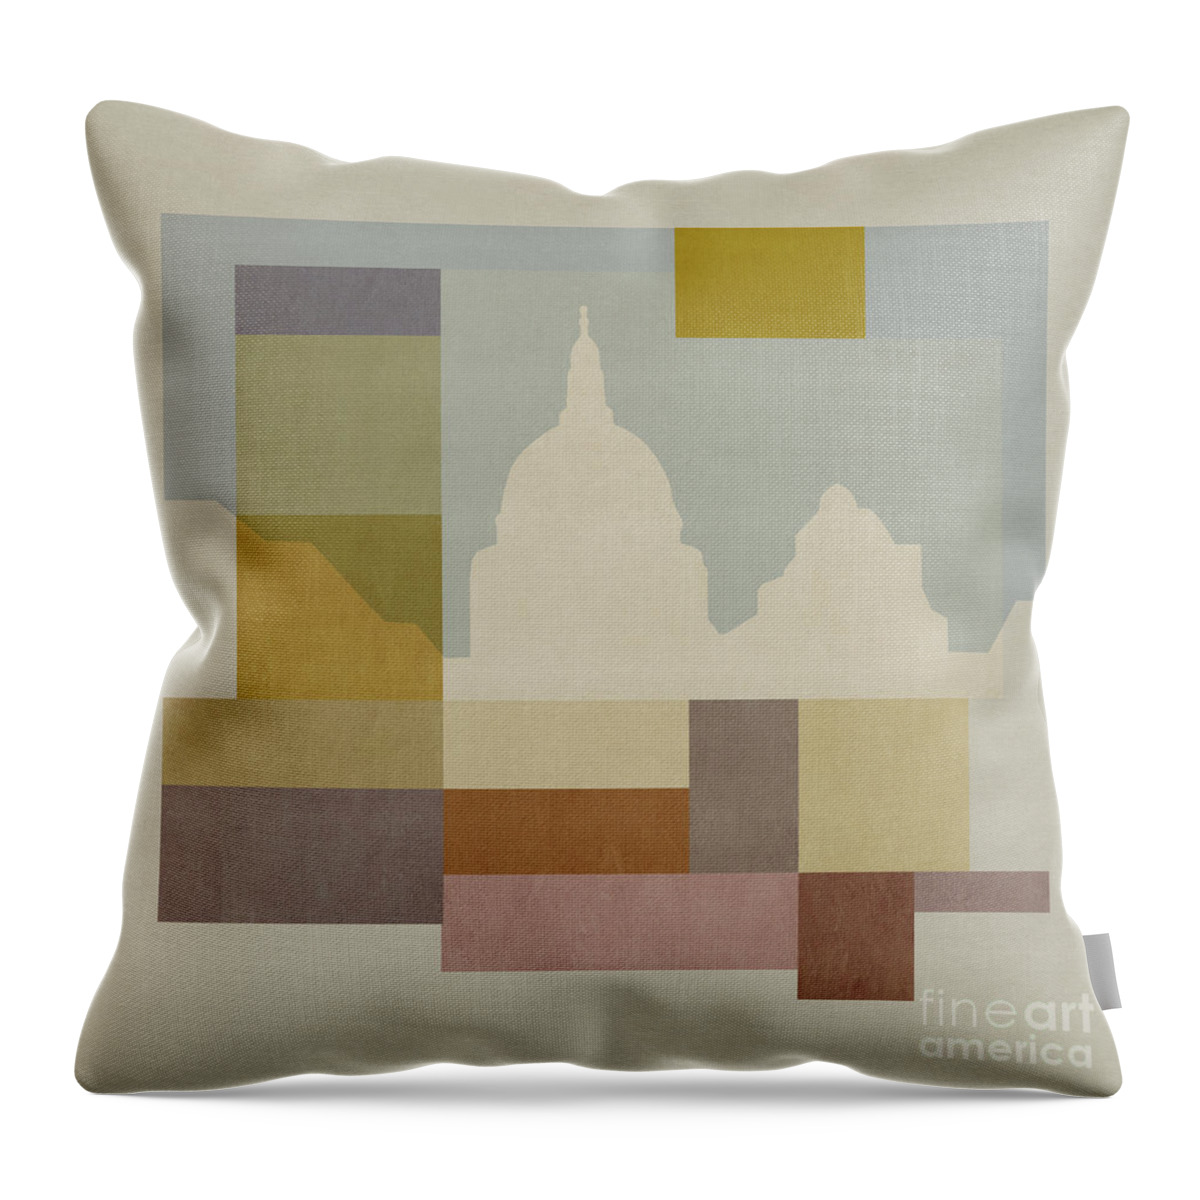 London Throw Pillow featuring the mixed media London Square - Saint Pauls by BFA Prints